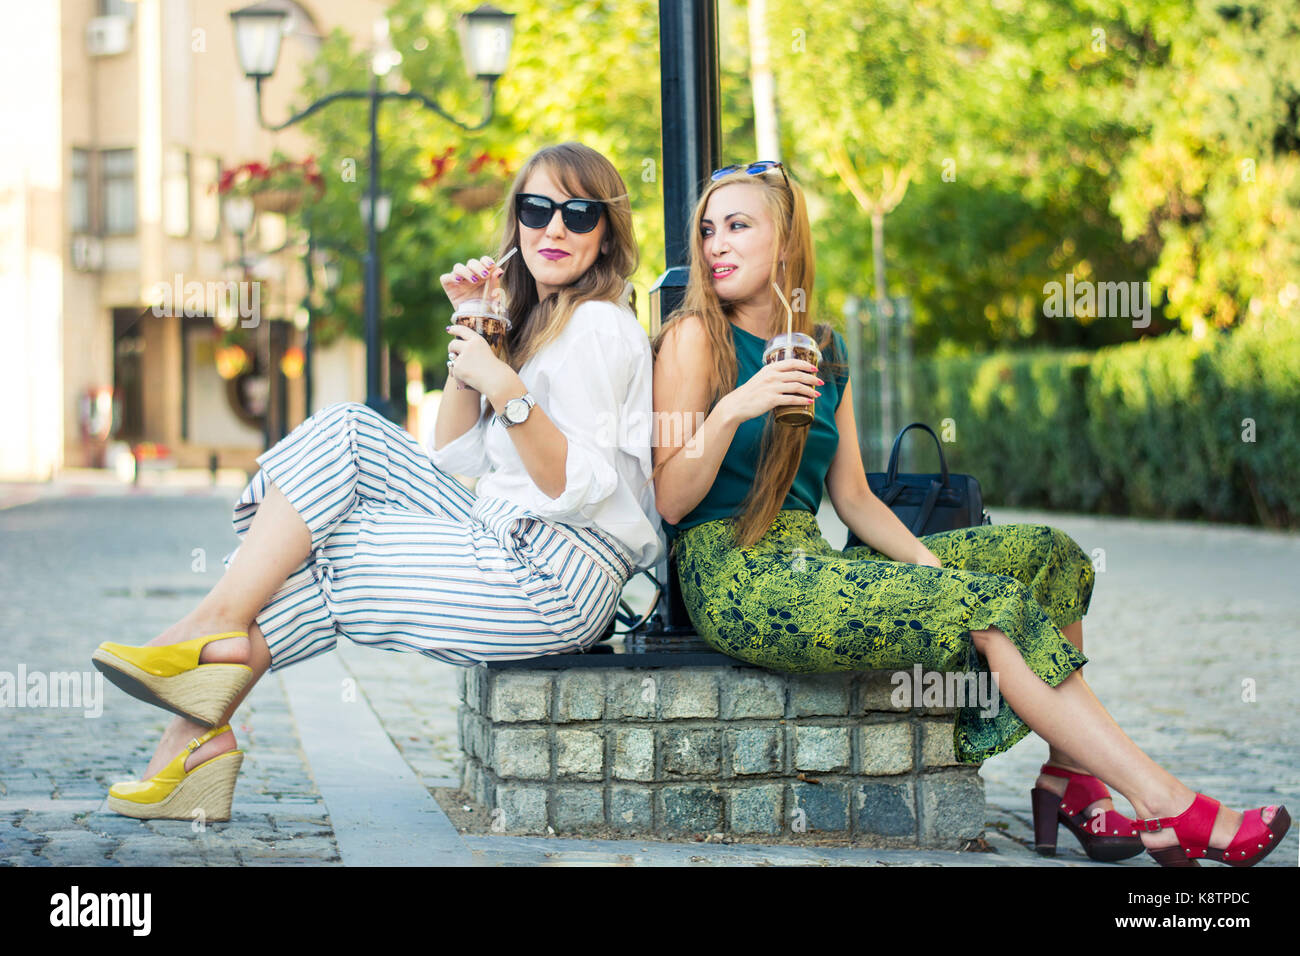 Two girl friends enjoying the day together outdoors Stock Photo